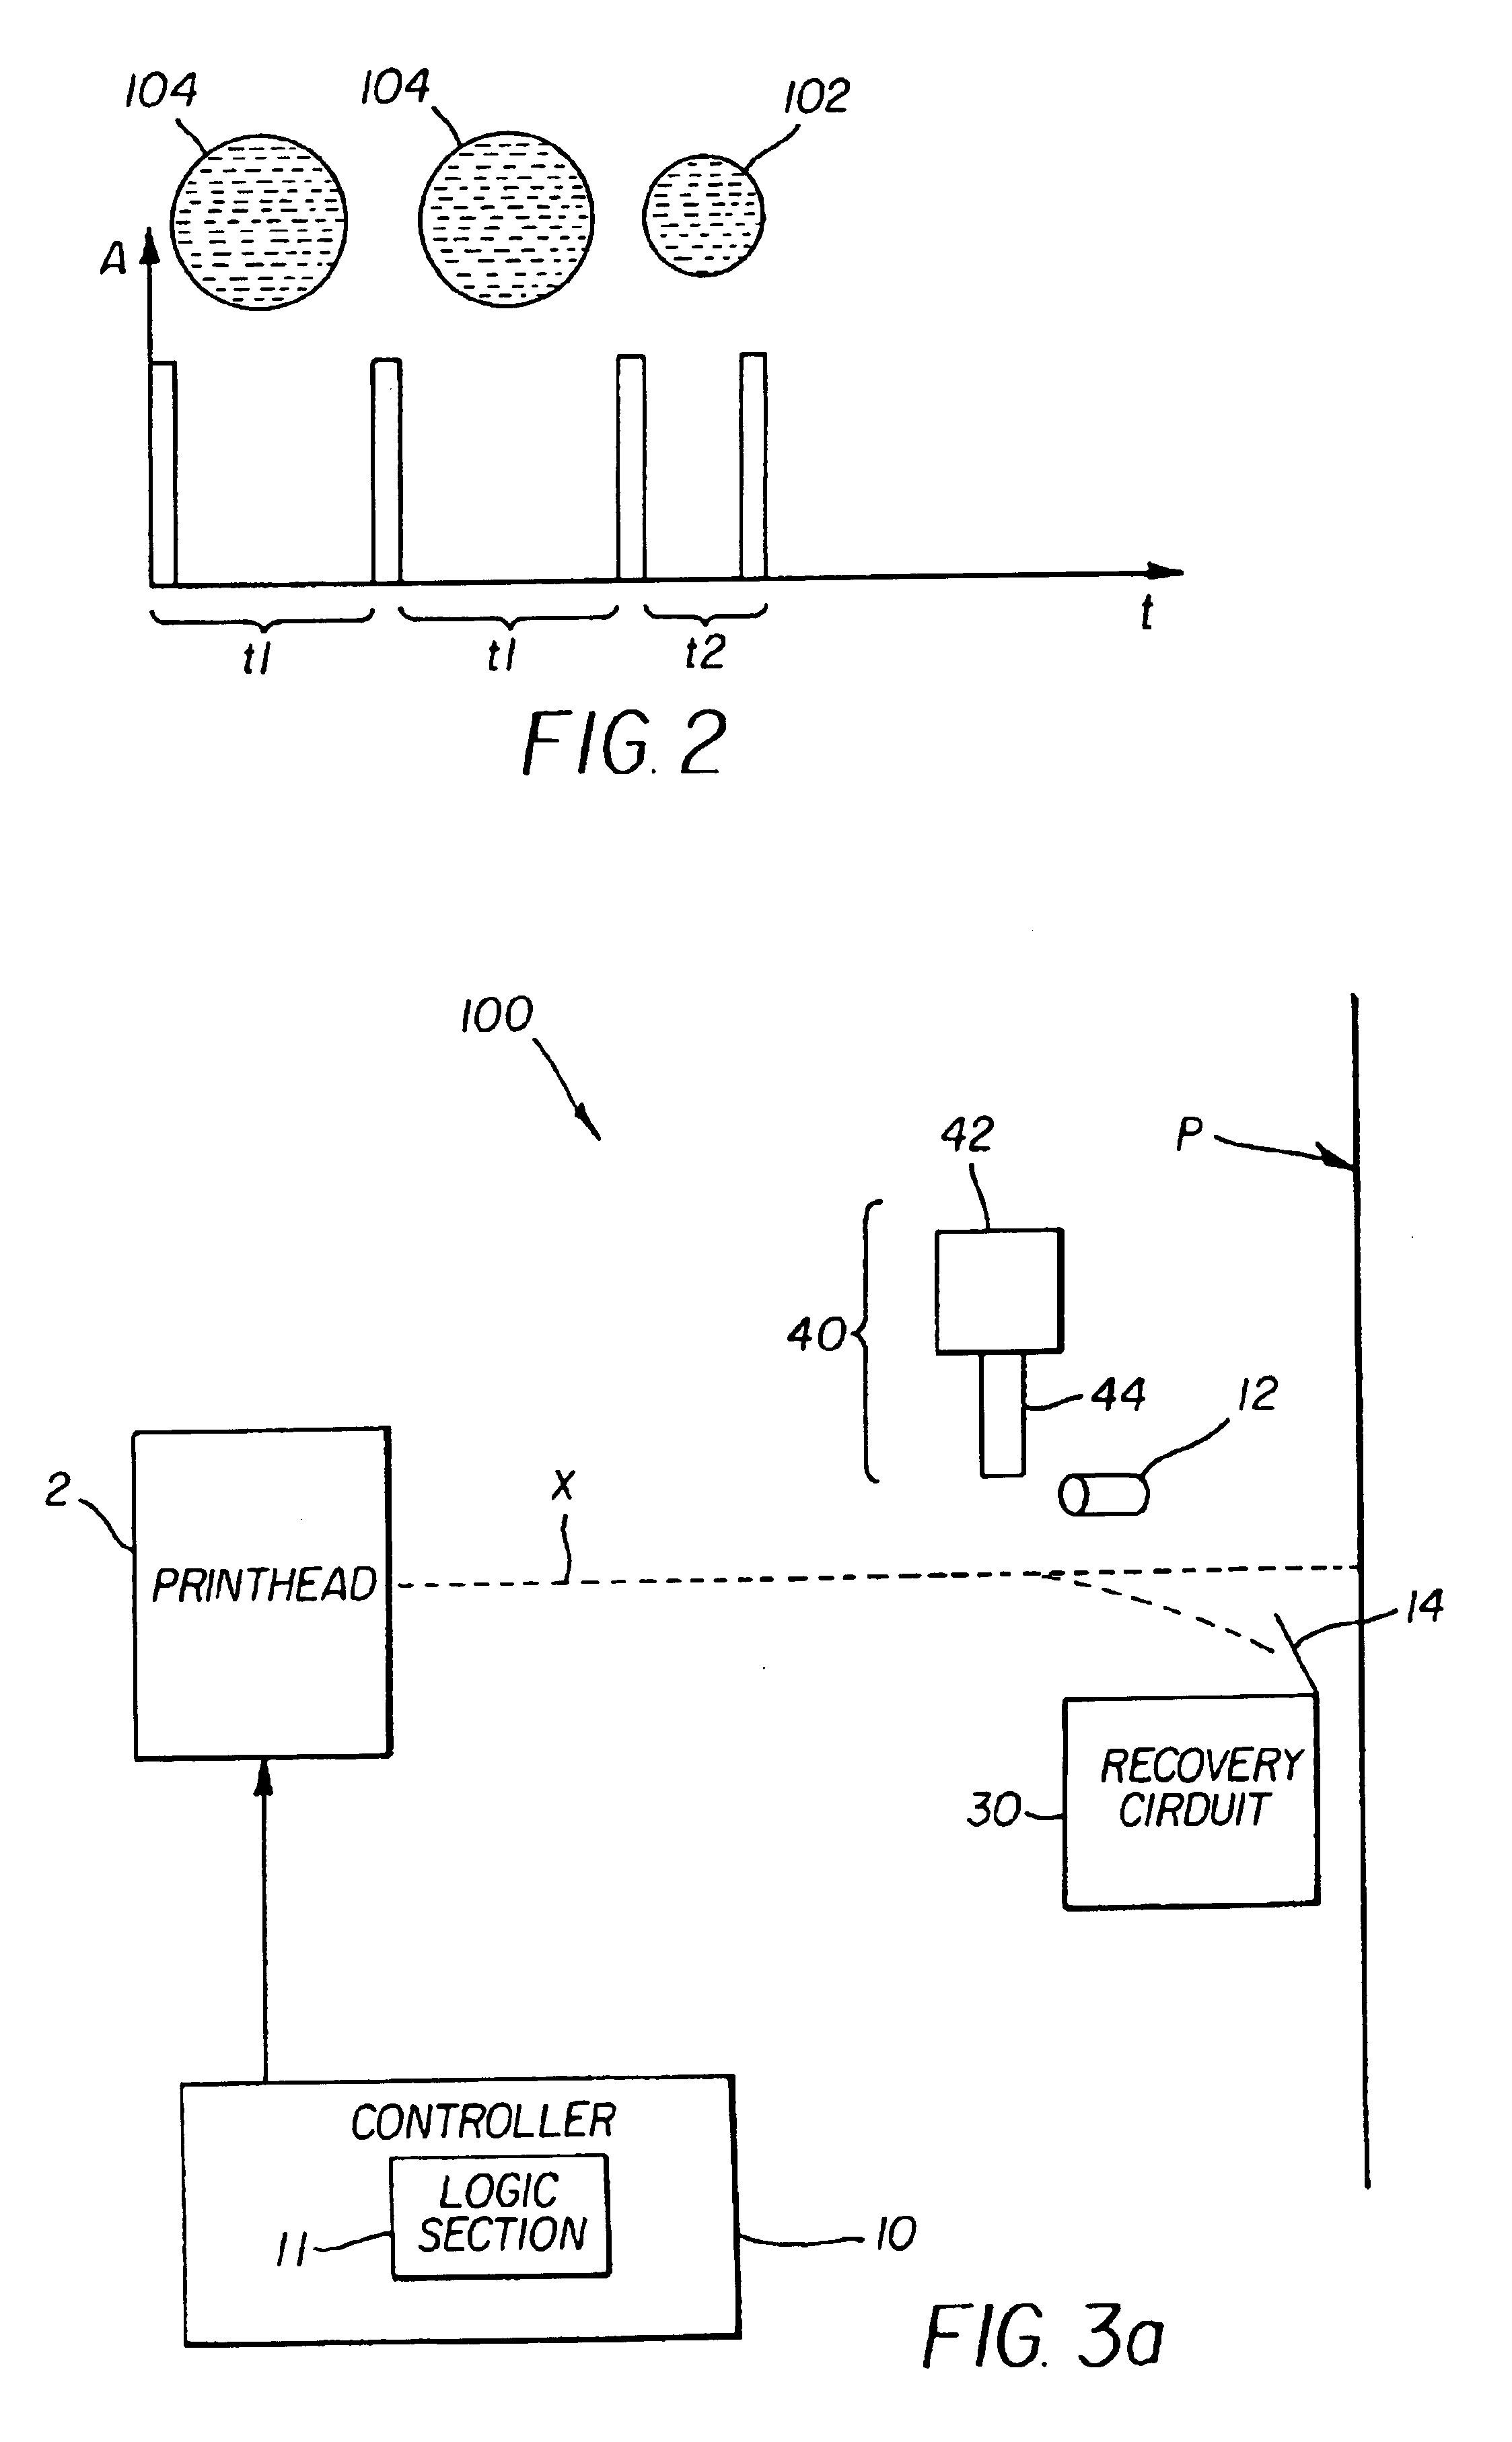 Apparatus and method for improving gas flow uniformity in a continuous stream ink jet printer